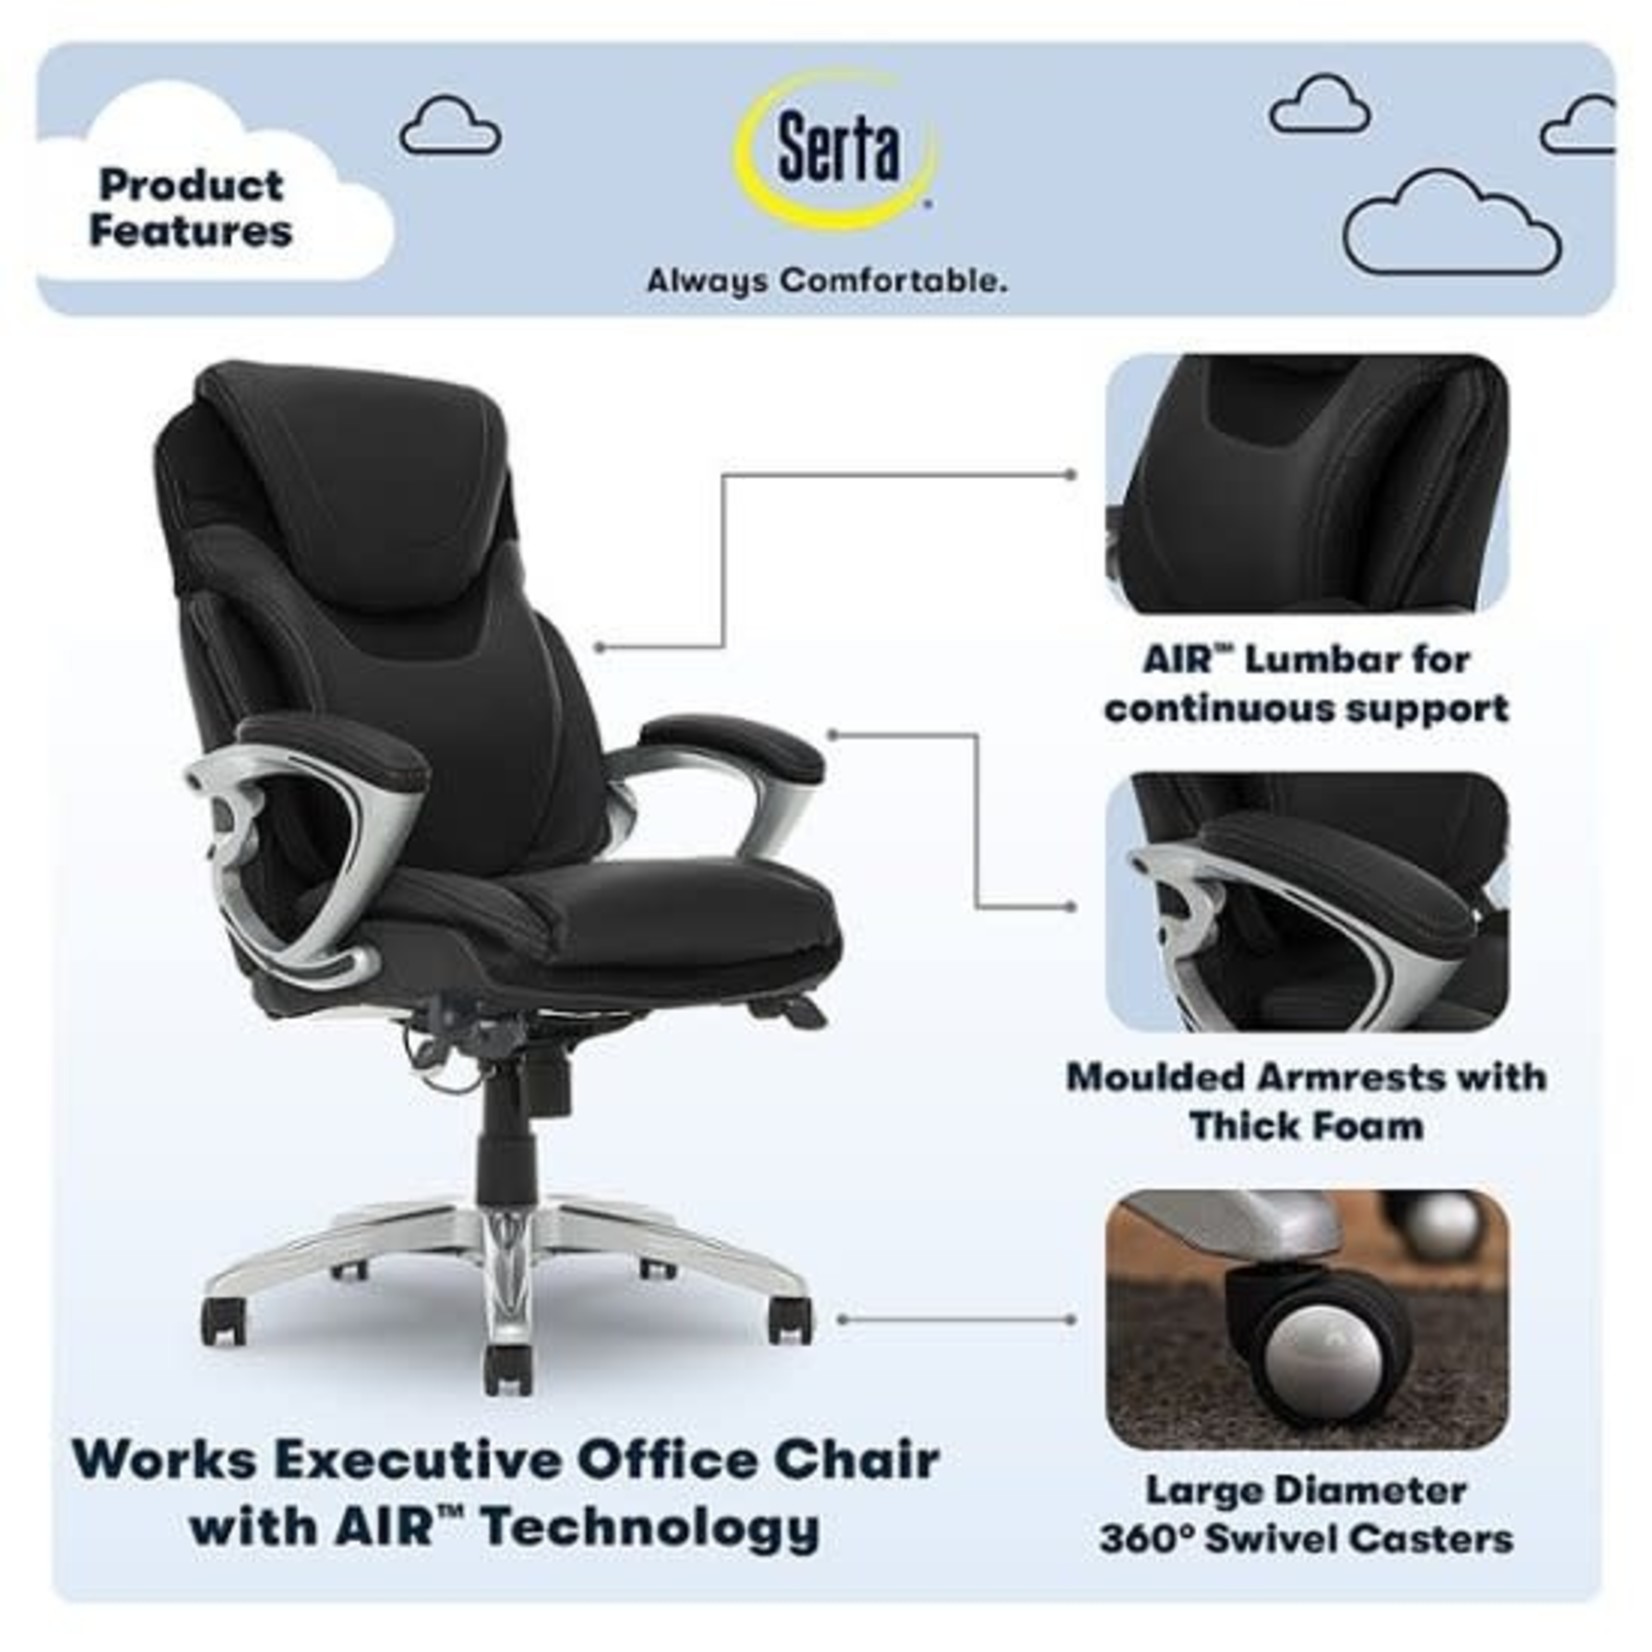 Serta Bryce Bonded Leather Executive Office Chair with AIR Technology - Black